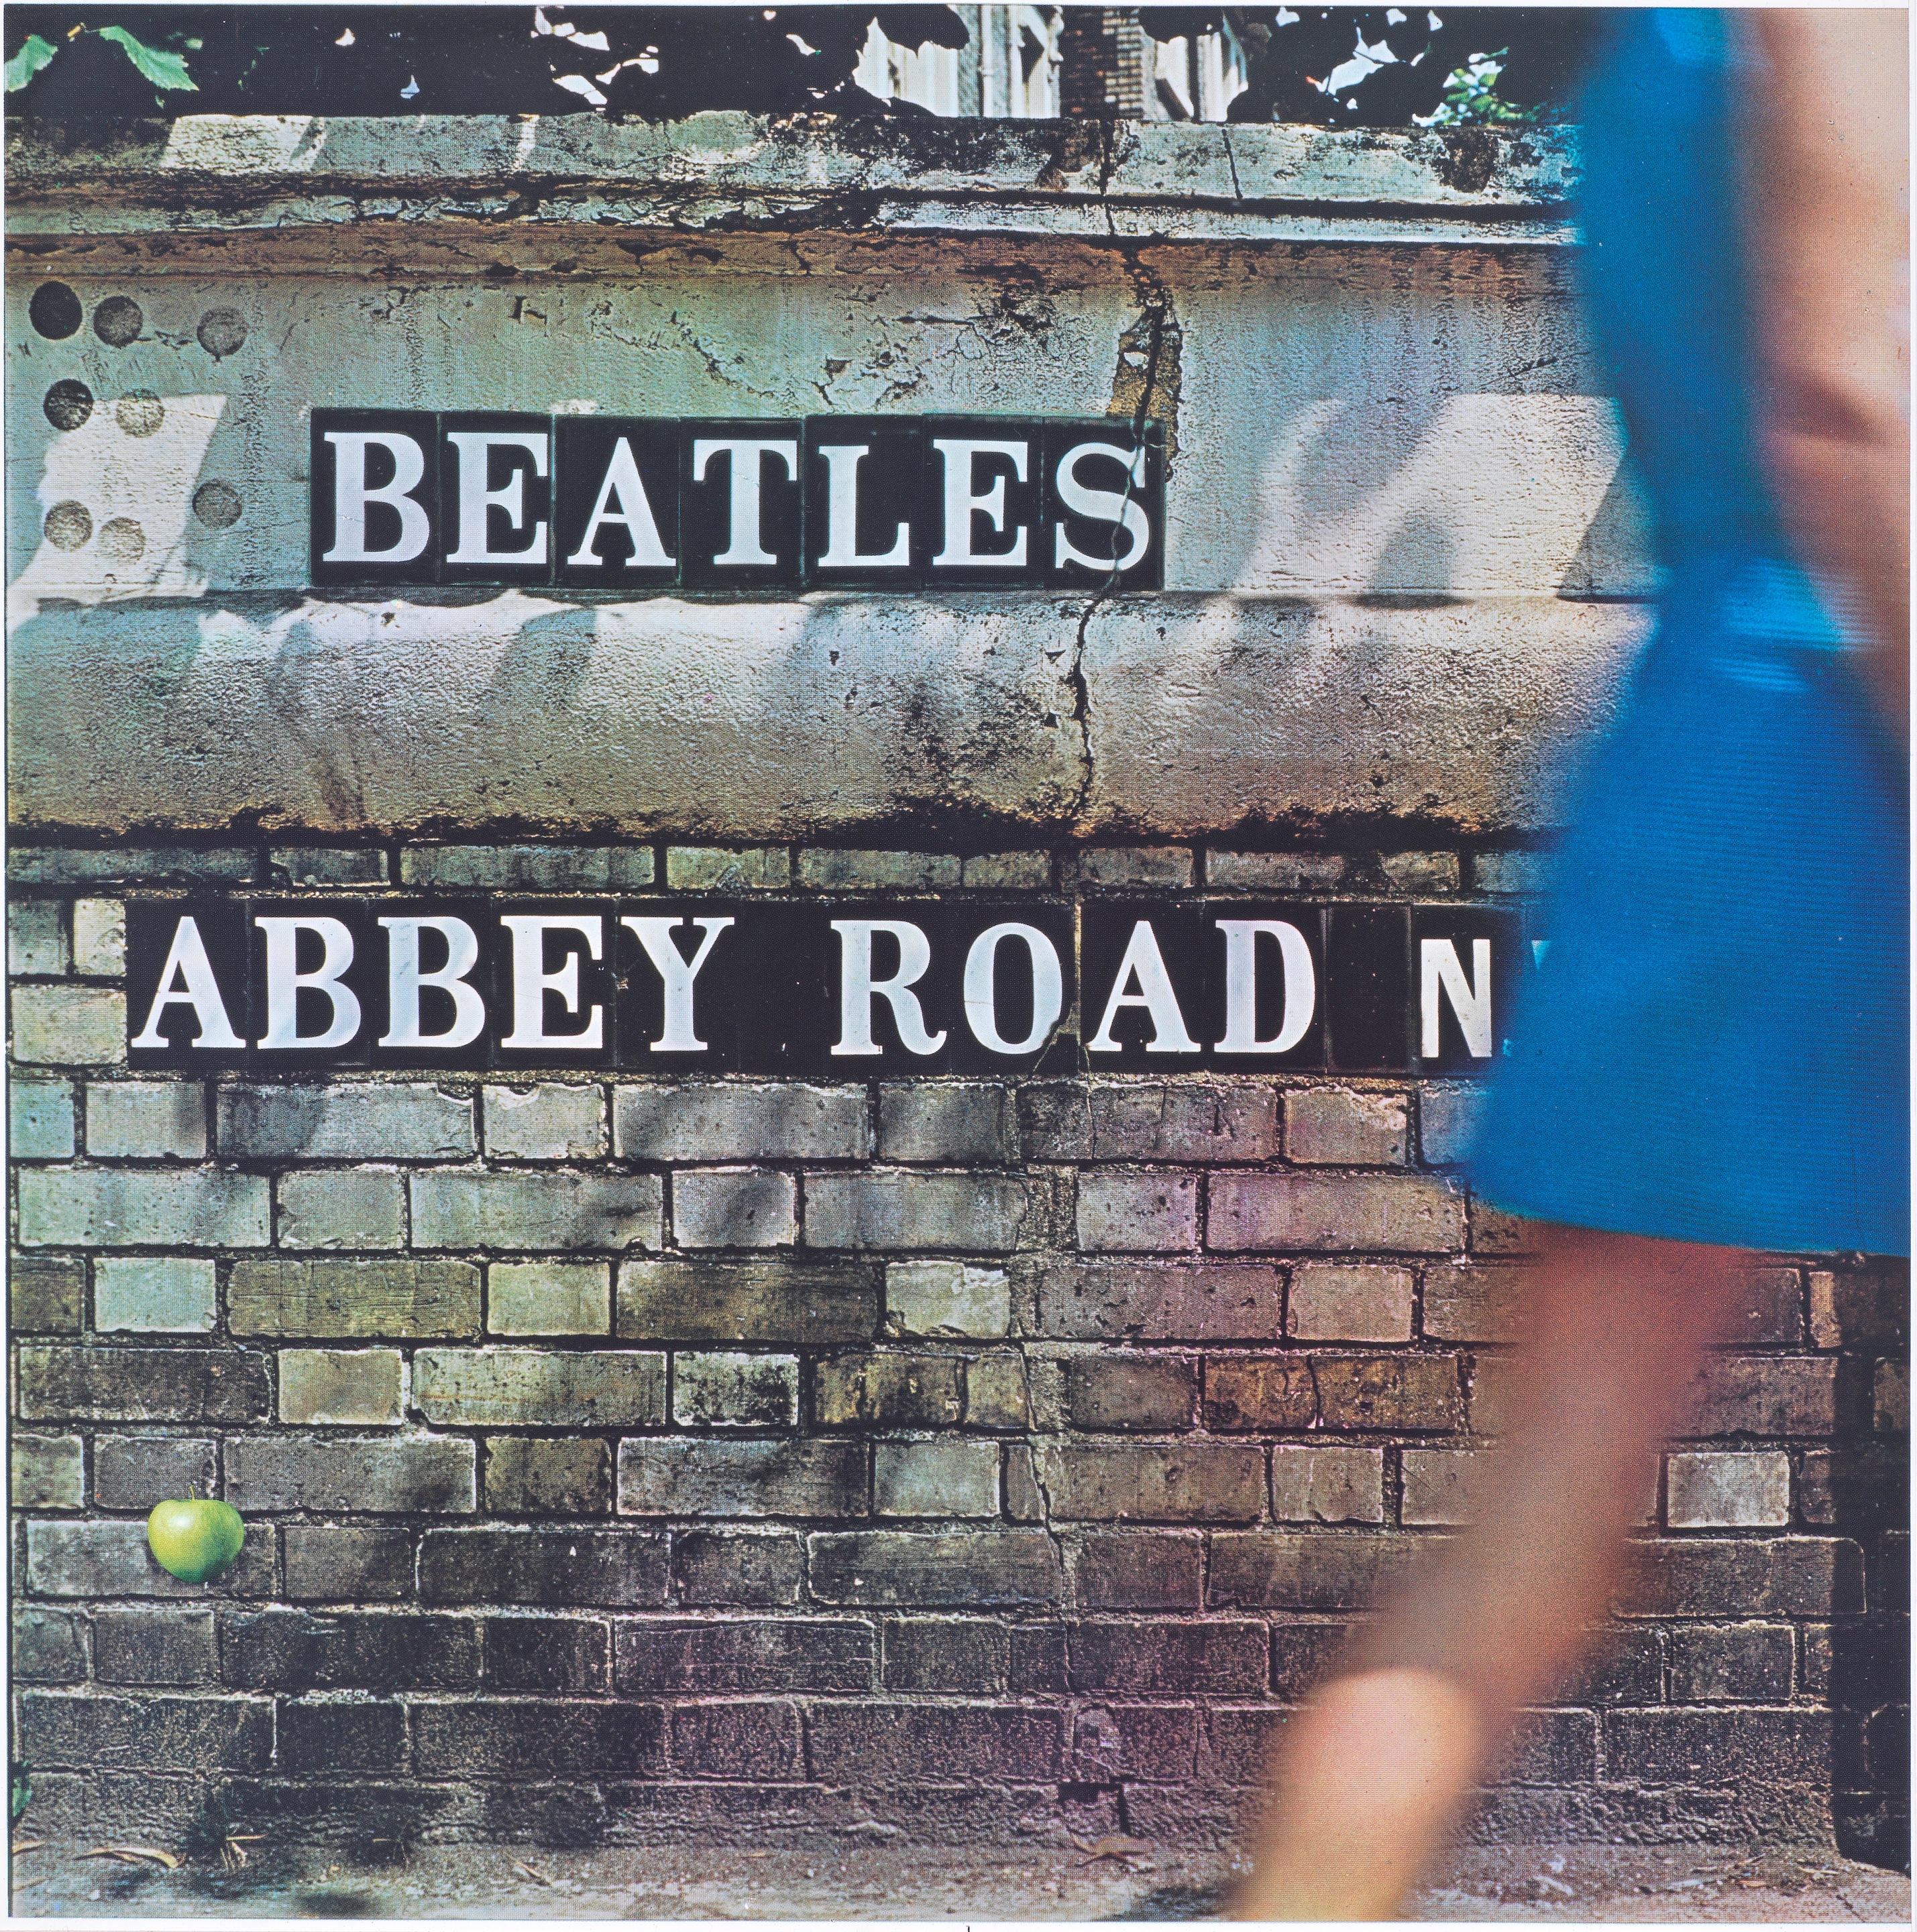 Mock-Up For The Back Cover of The Beatles' Album, Abbey Road